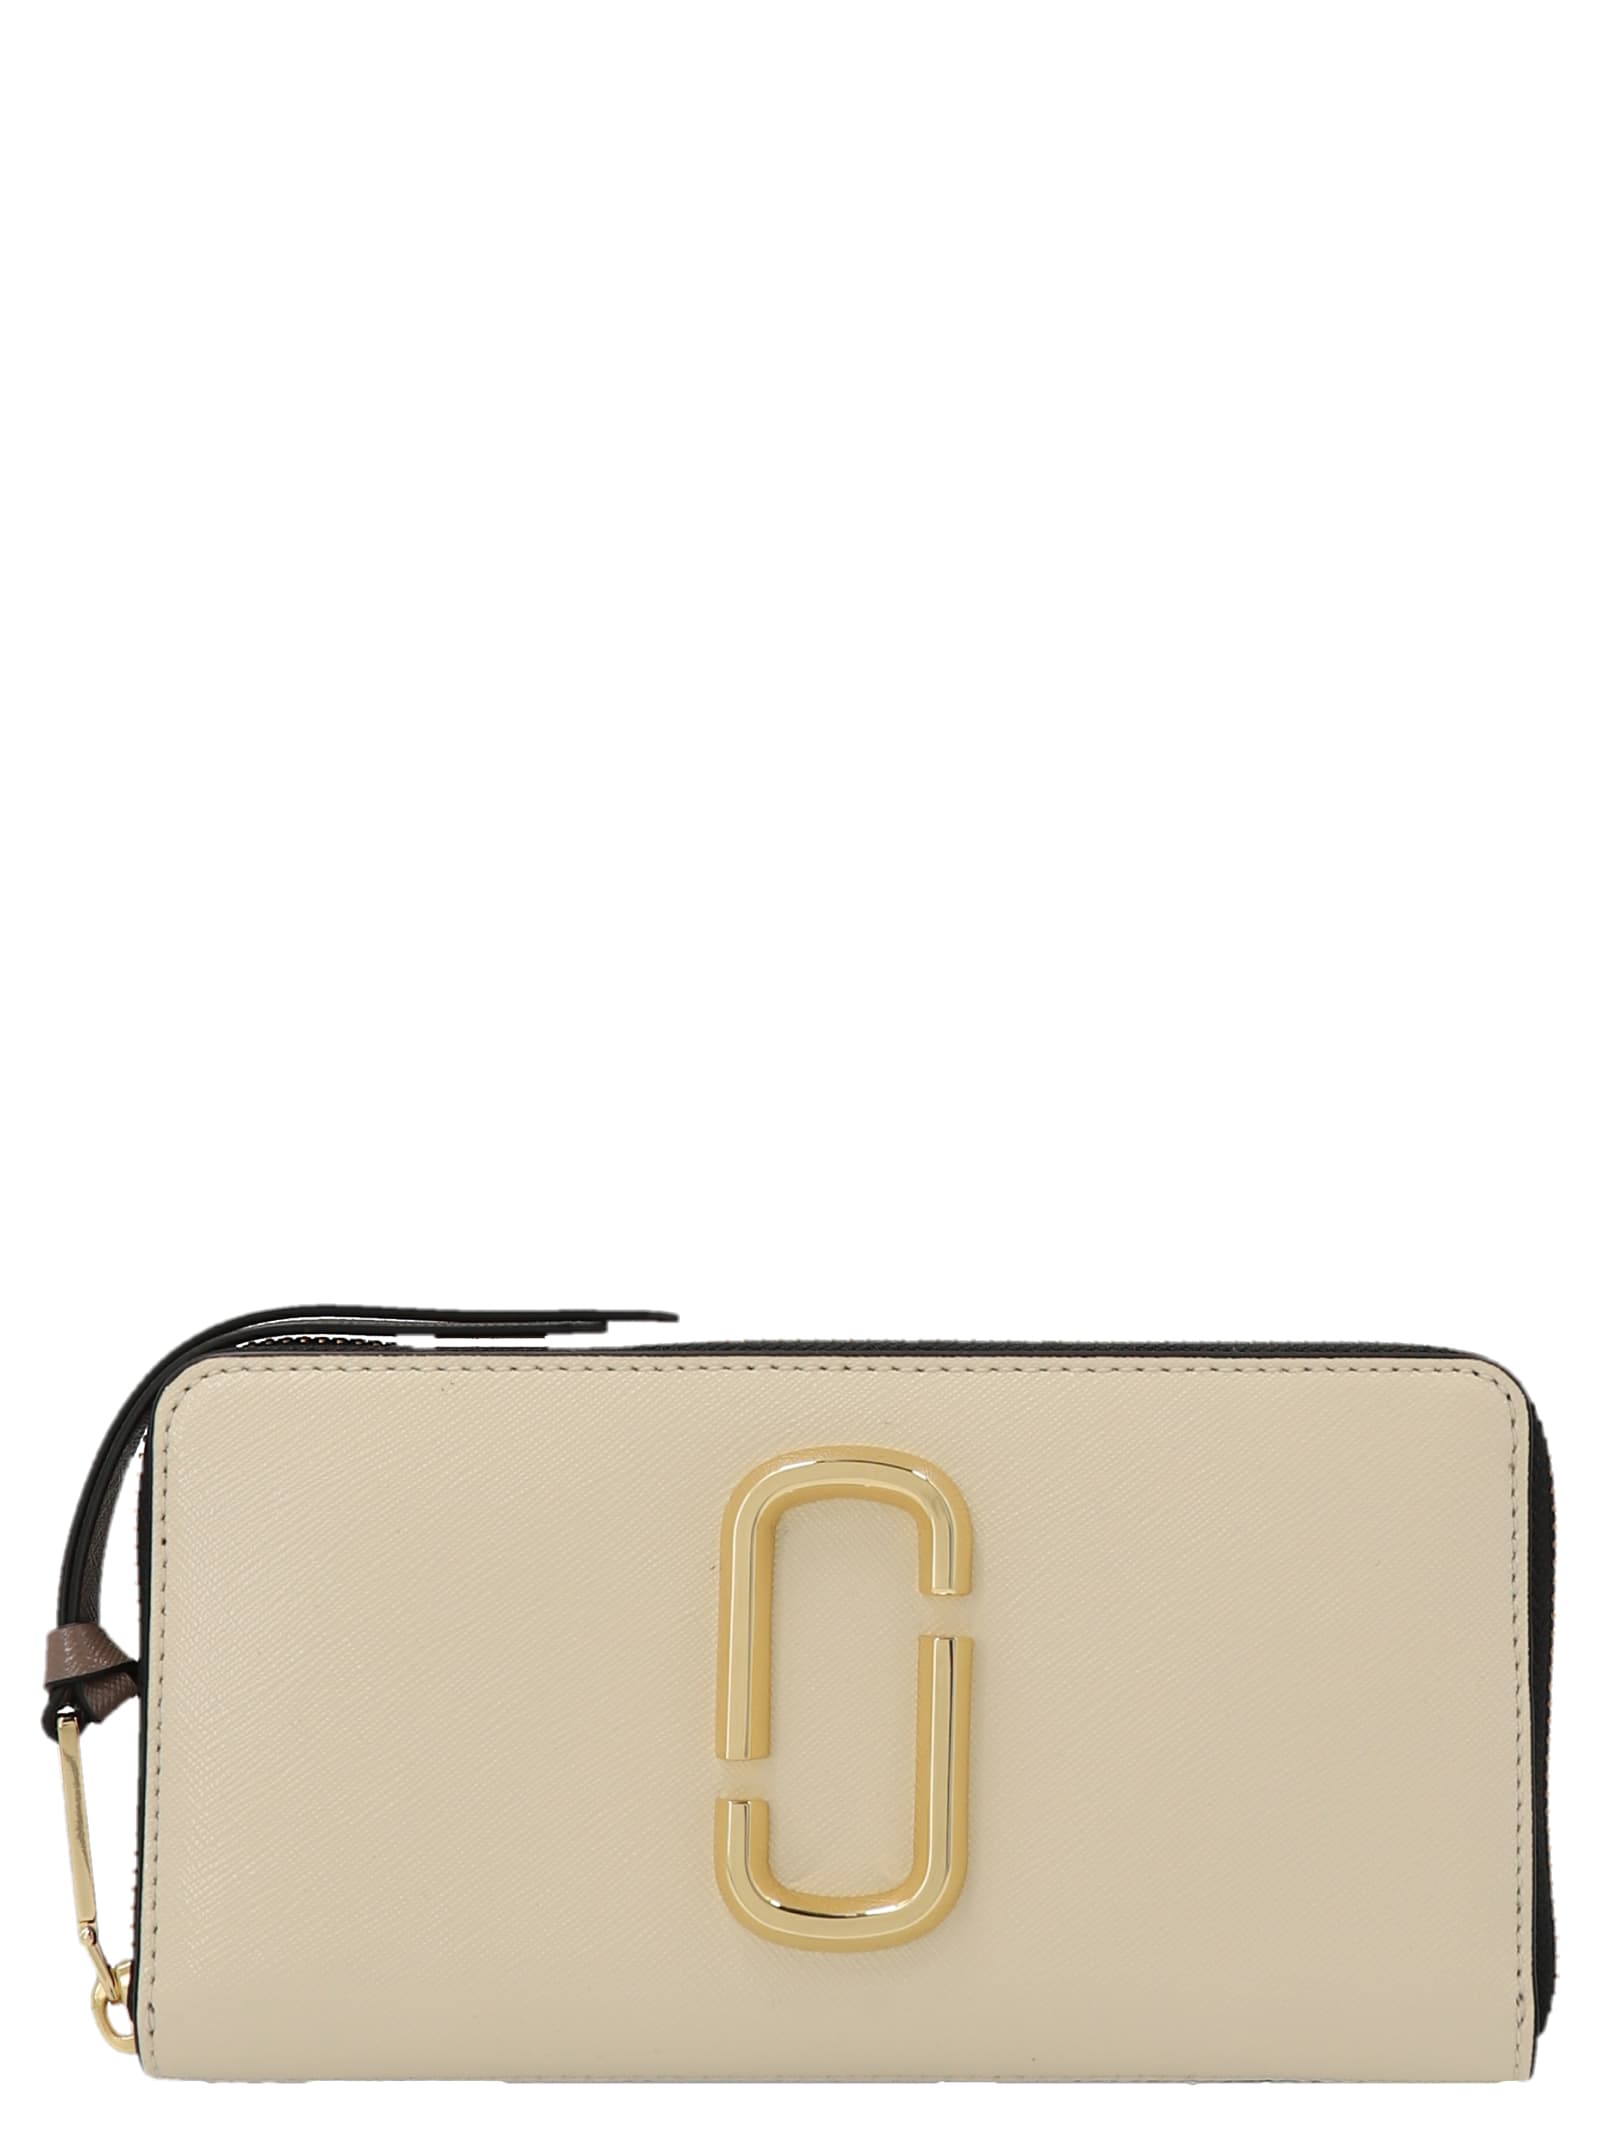 Marc Jacobs the Snapshot Standard Continental Wallet